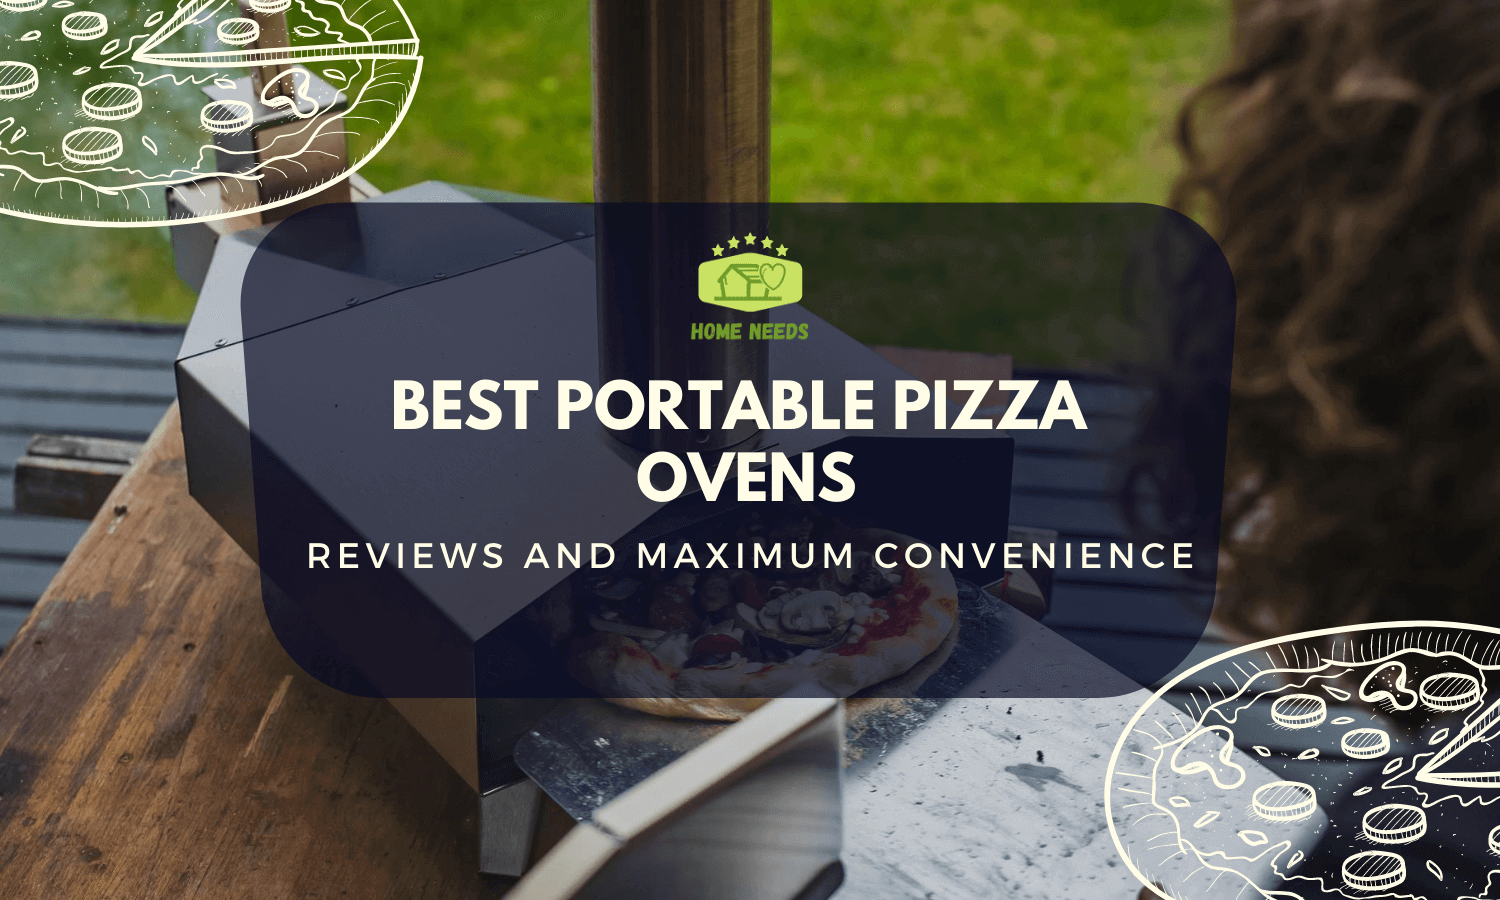 Best Portable Pizza Ovens